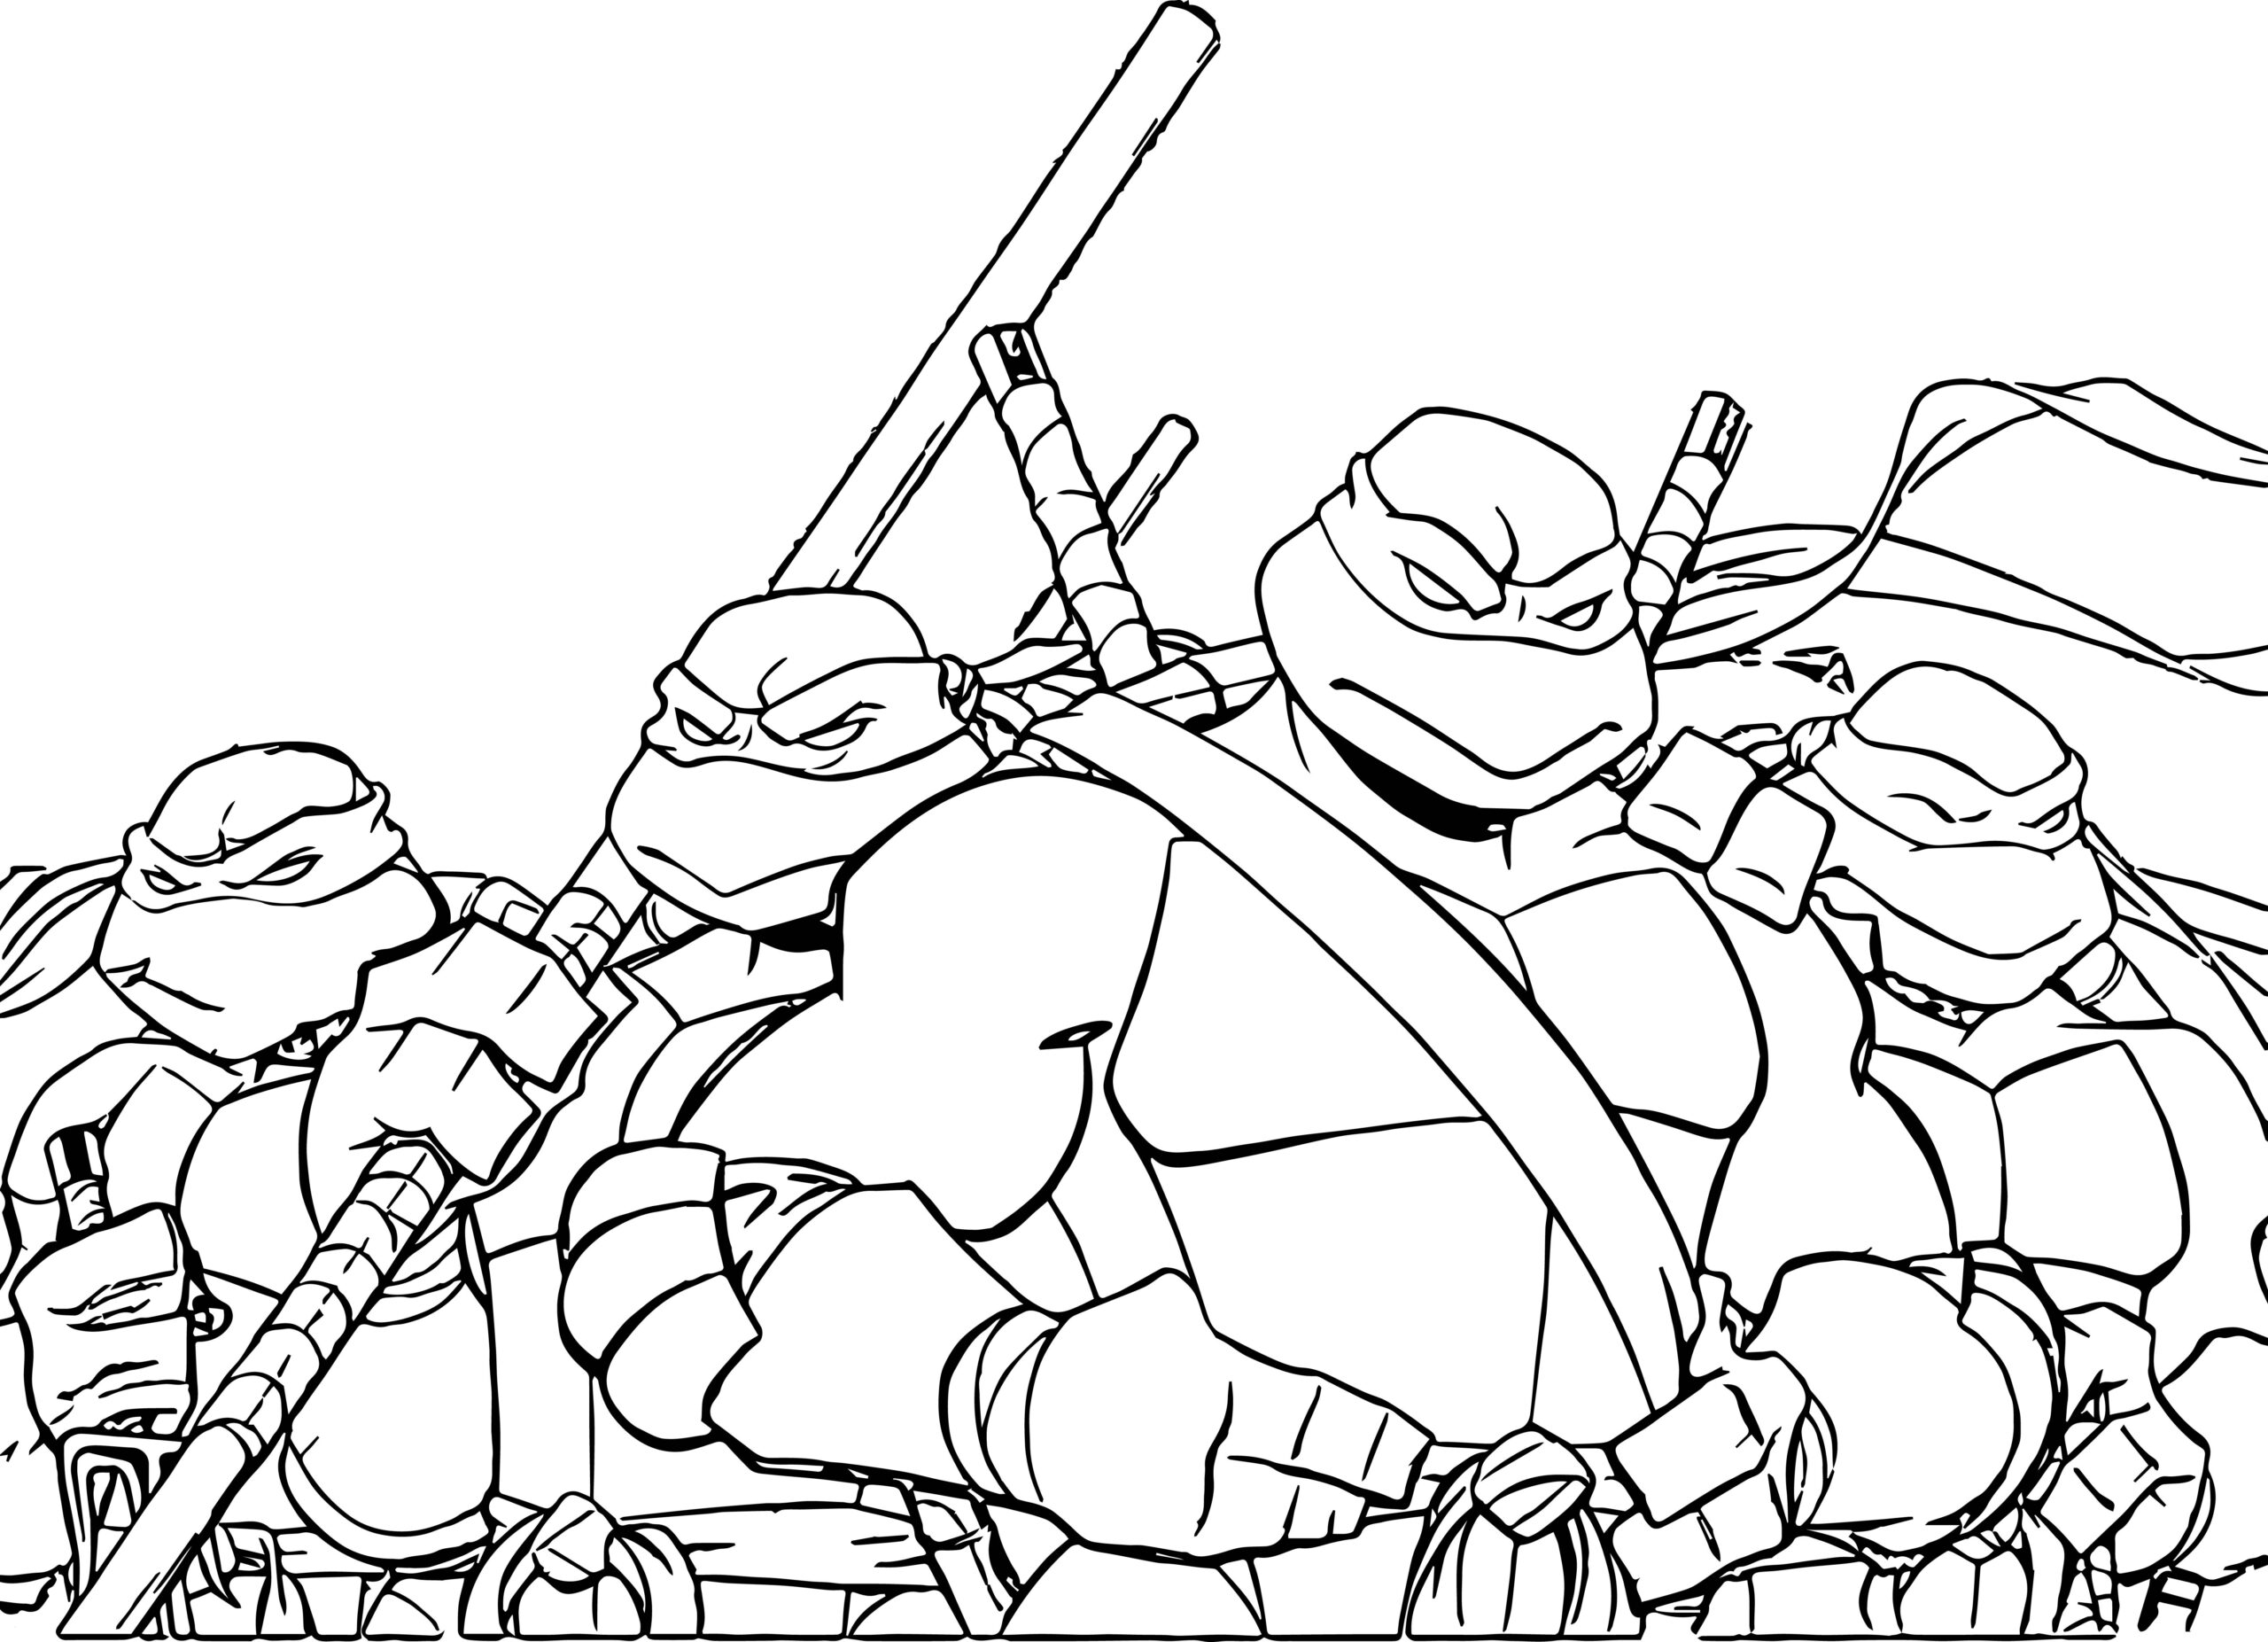 nickelodeon ninja turtles coloring pages coloring pages coloring gallery